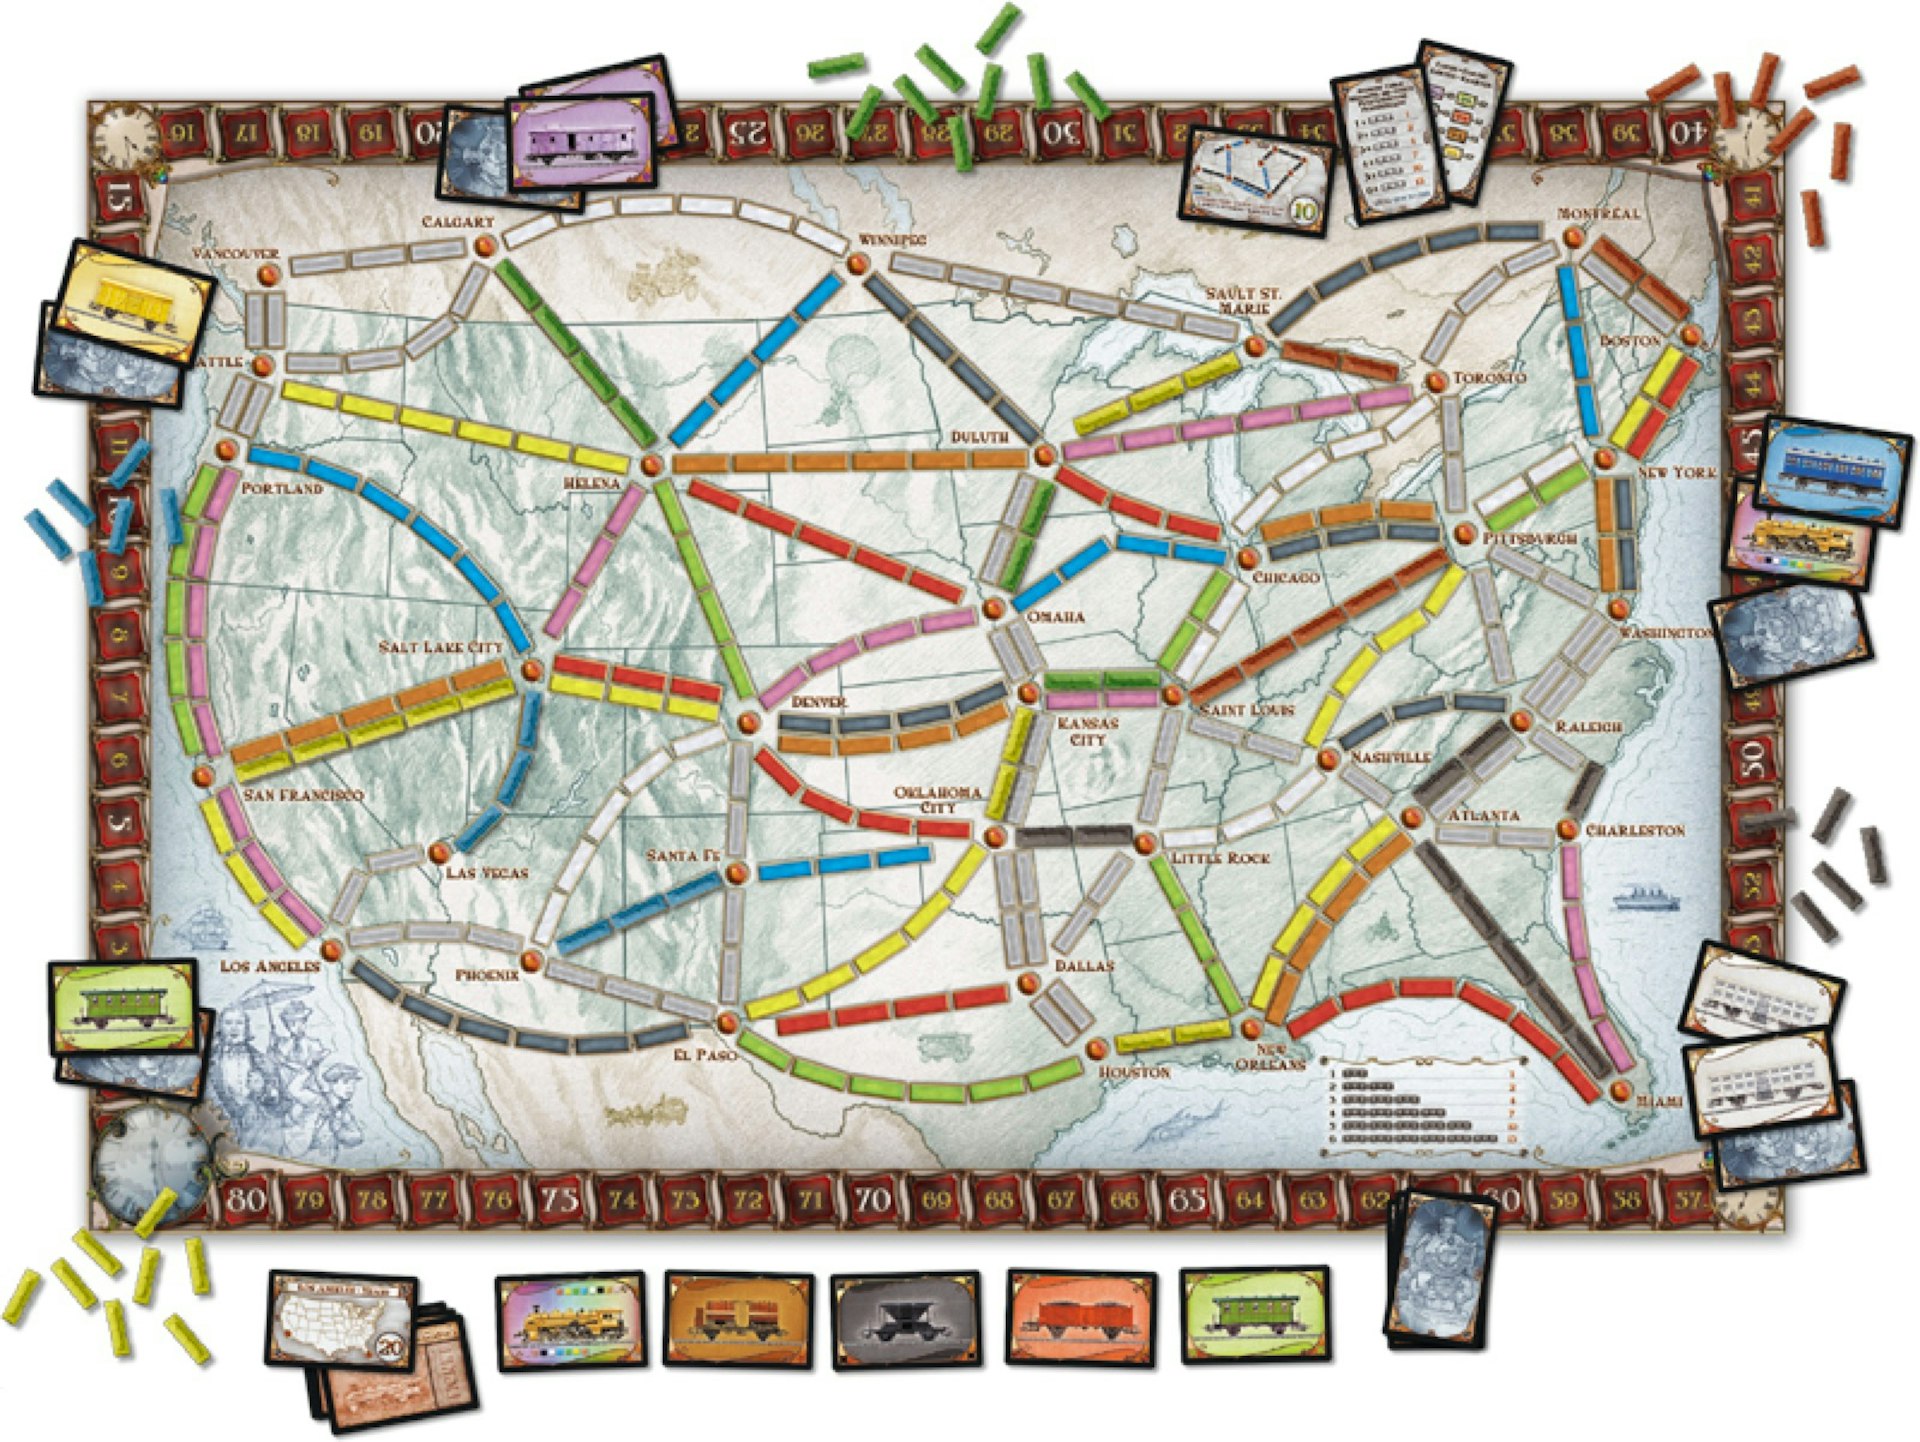 The board game Ticket to Ride is laid out on a white background